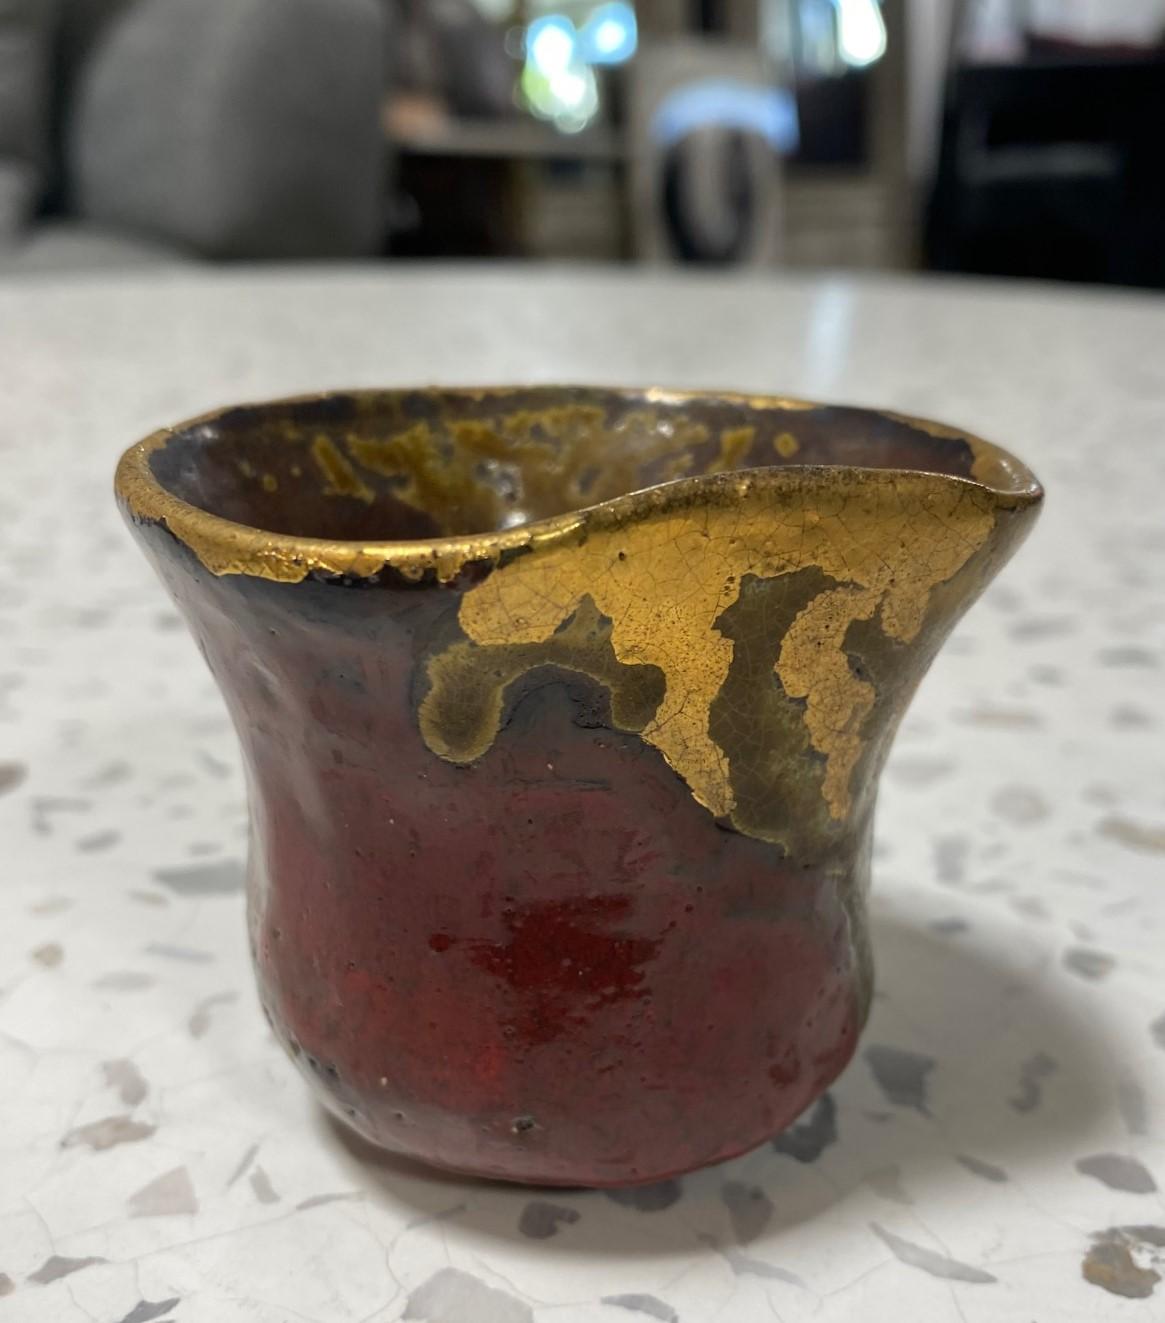 Japanese Asian Signed Studio Pottery Wabi-Sabi Red & Gold Glazed Yunomi Teacup In Good Condition For Sale In Studio City, CA